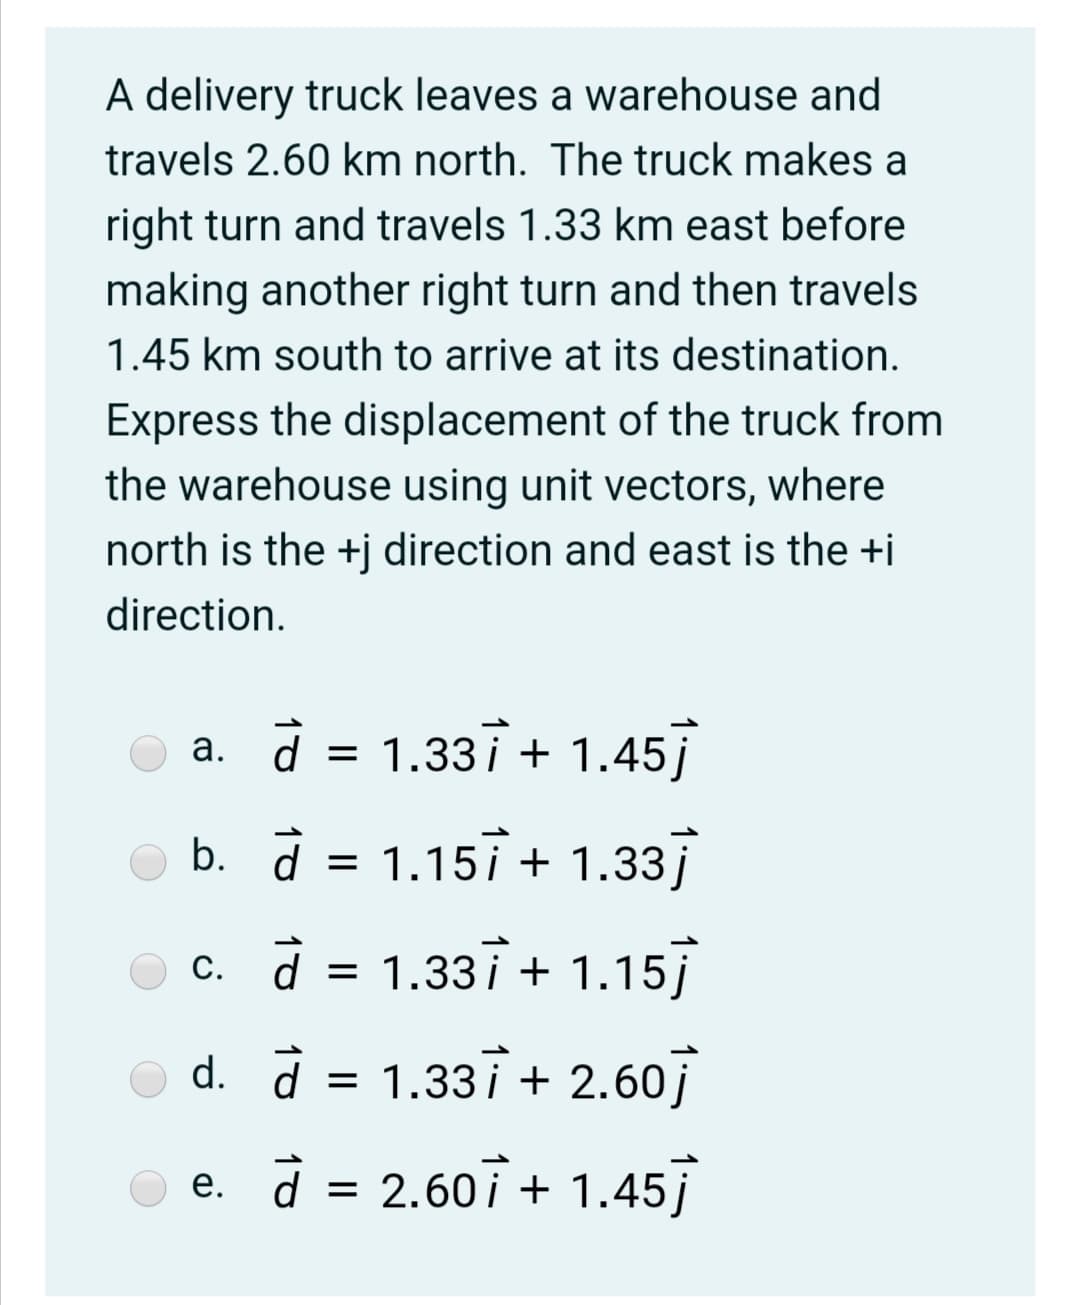 A delivery truck leaves a warehouse and
travels 2.60 km north. The truck makes a
right turn and travels 1.33 km east before
making another right turn and then travels
1.45 km south to arrive at its destination.
Express the displacement of the truck from
the warehouse using unit vectors, where
north is the +j direction and east is the +i
direction.
a. d = 1.337 + 1.45
b. d = 1.157 + 1.33]
c. d = 1.337 + 1.15
d. à =
1.337 + 2.60j
e. d = 2.607 + 1.45
